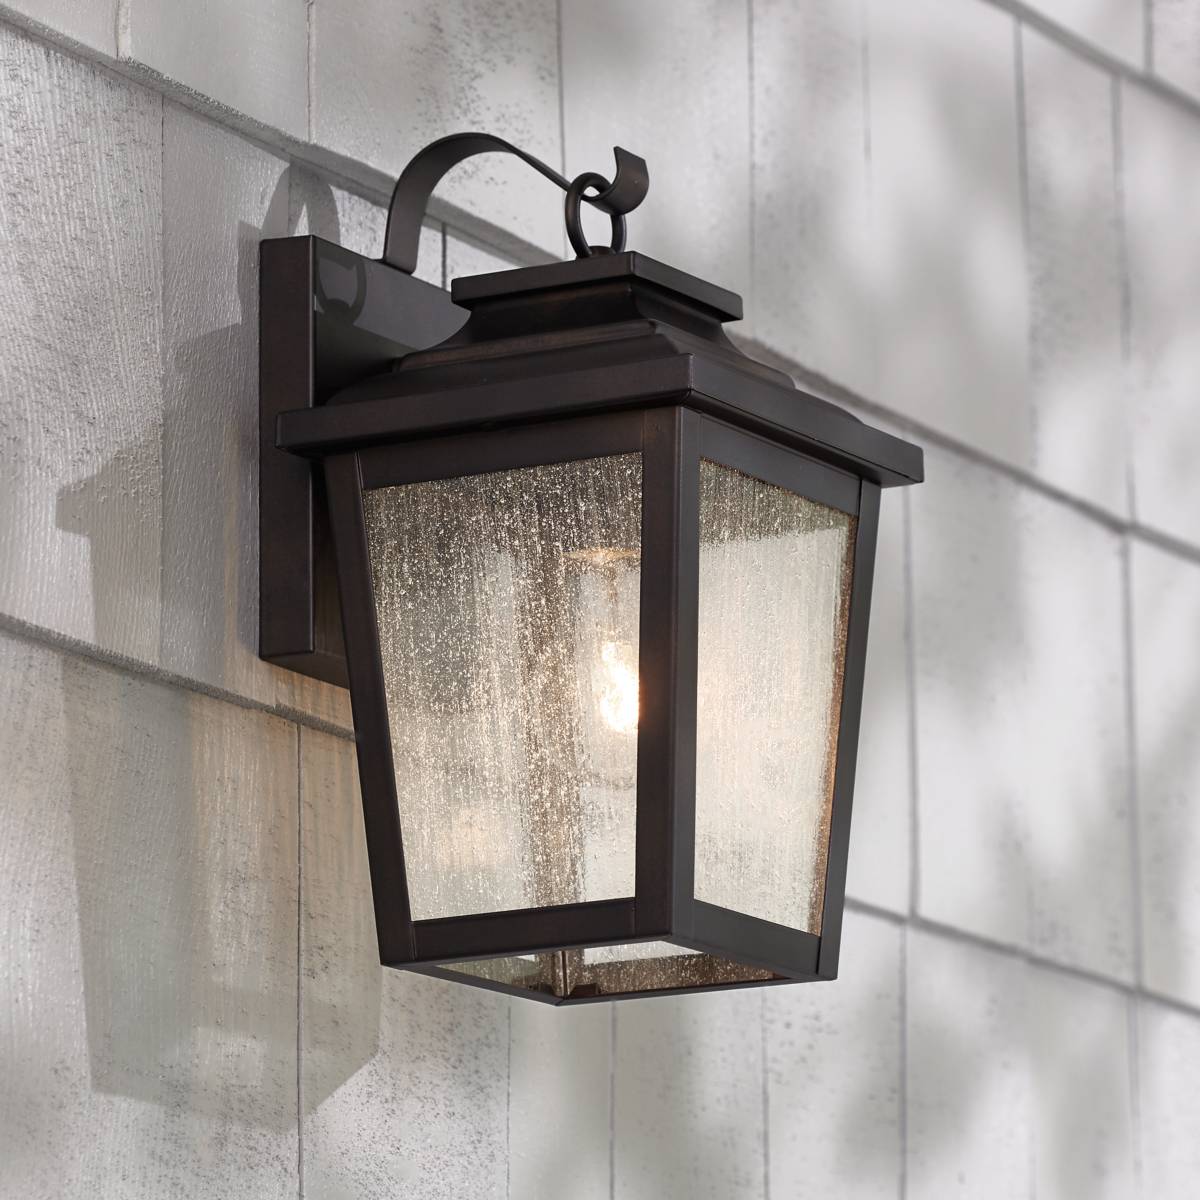 Outdoor Lighting and Light Fixtures - Page 5 | Lamps Plus